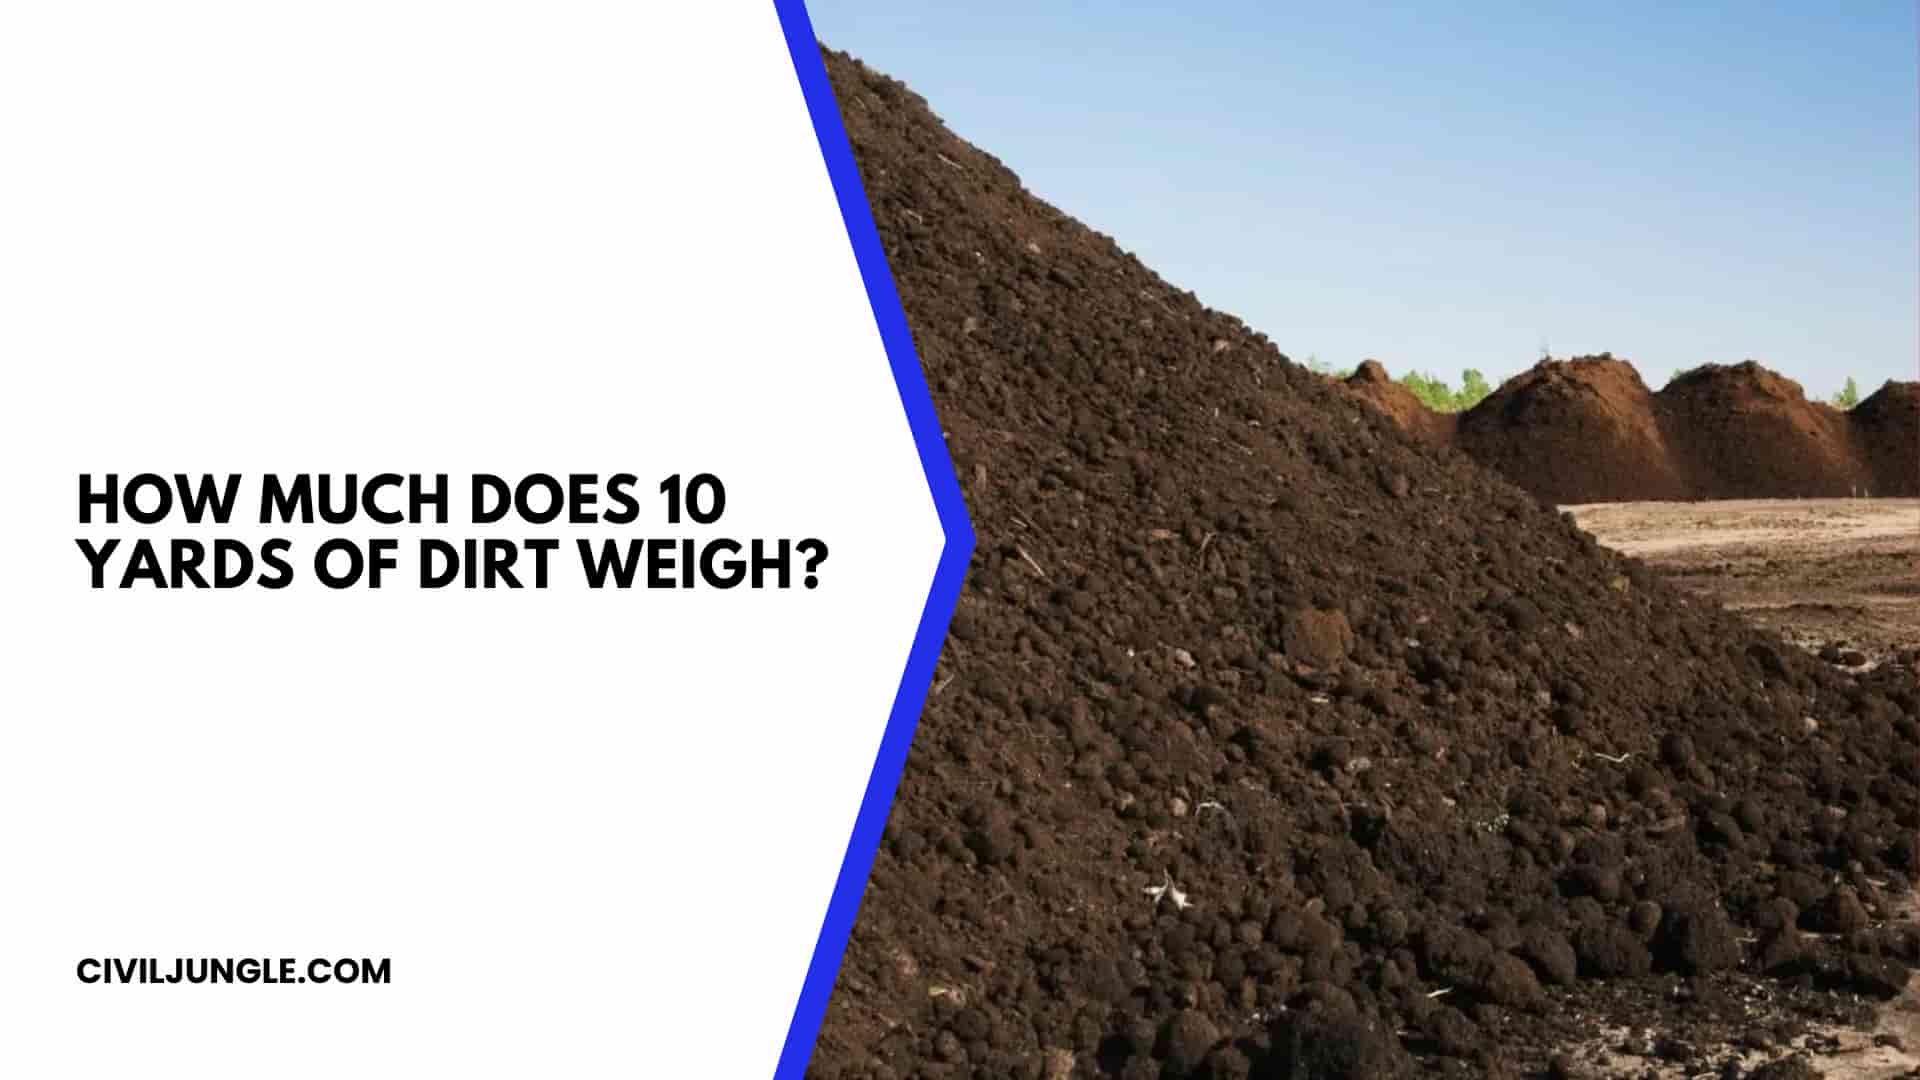 How Much Does 10 Yards of Dirt Weigh?